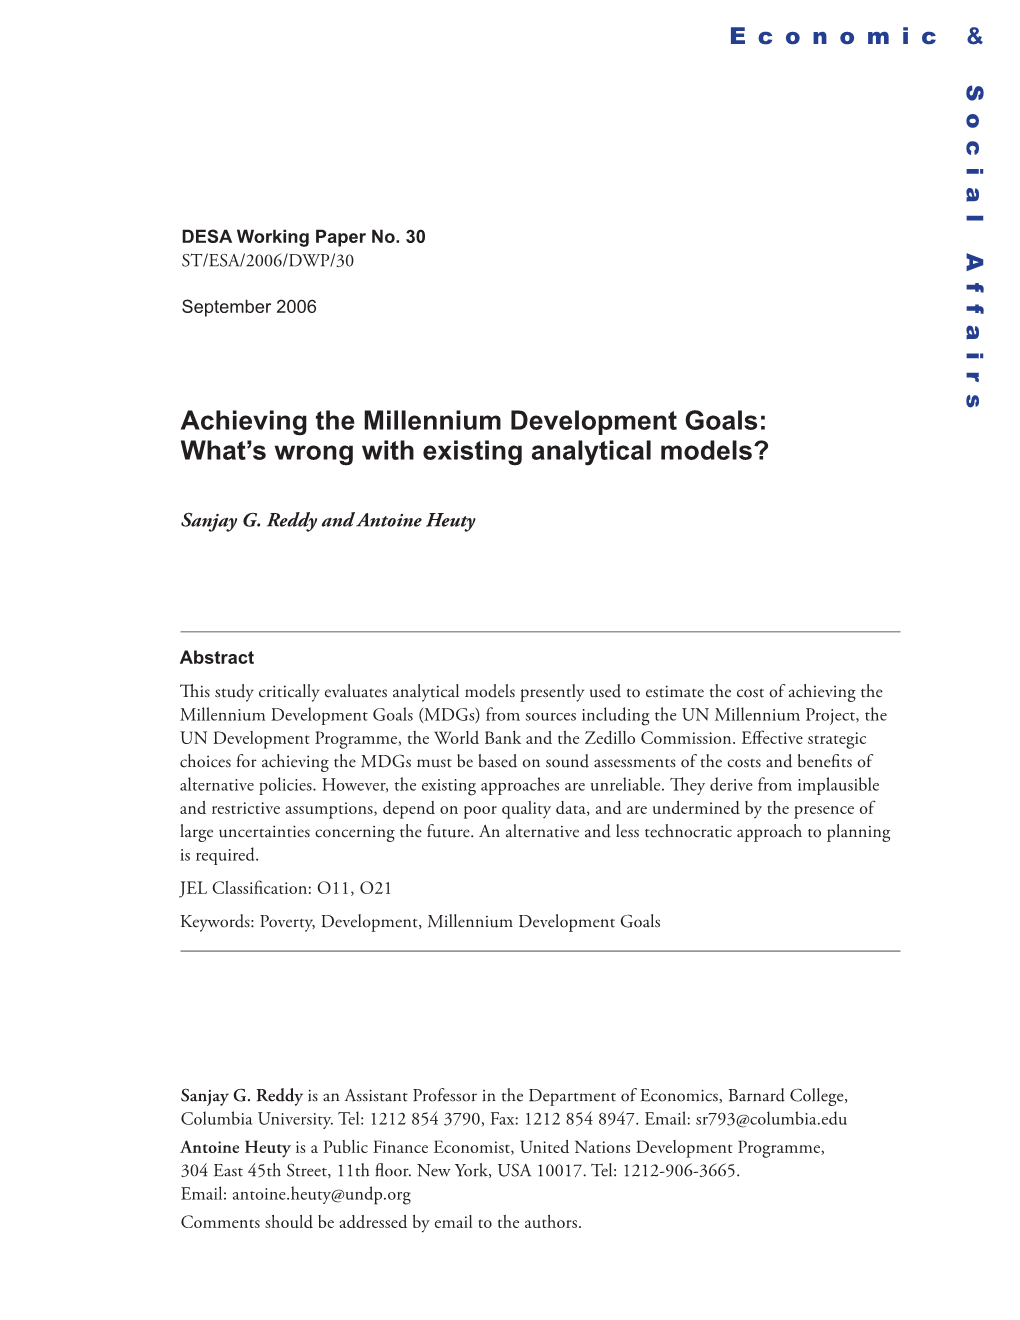 Achieving the Millennium Development Goals: What’S Wrong with Existing Analytical Models?